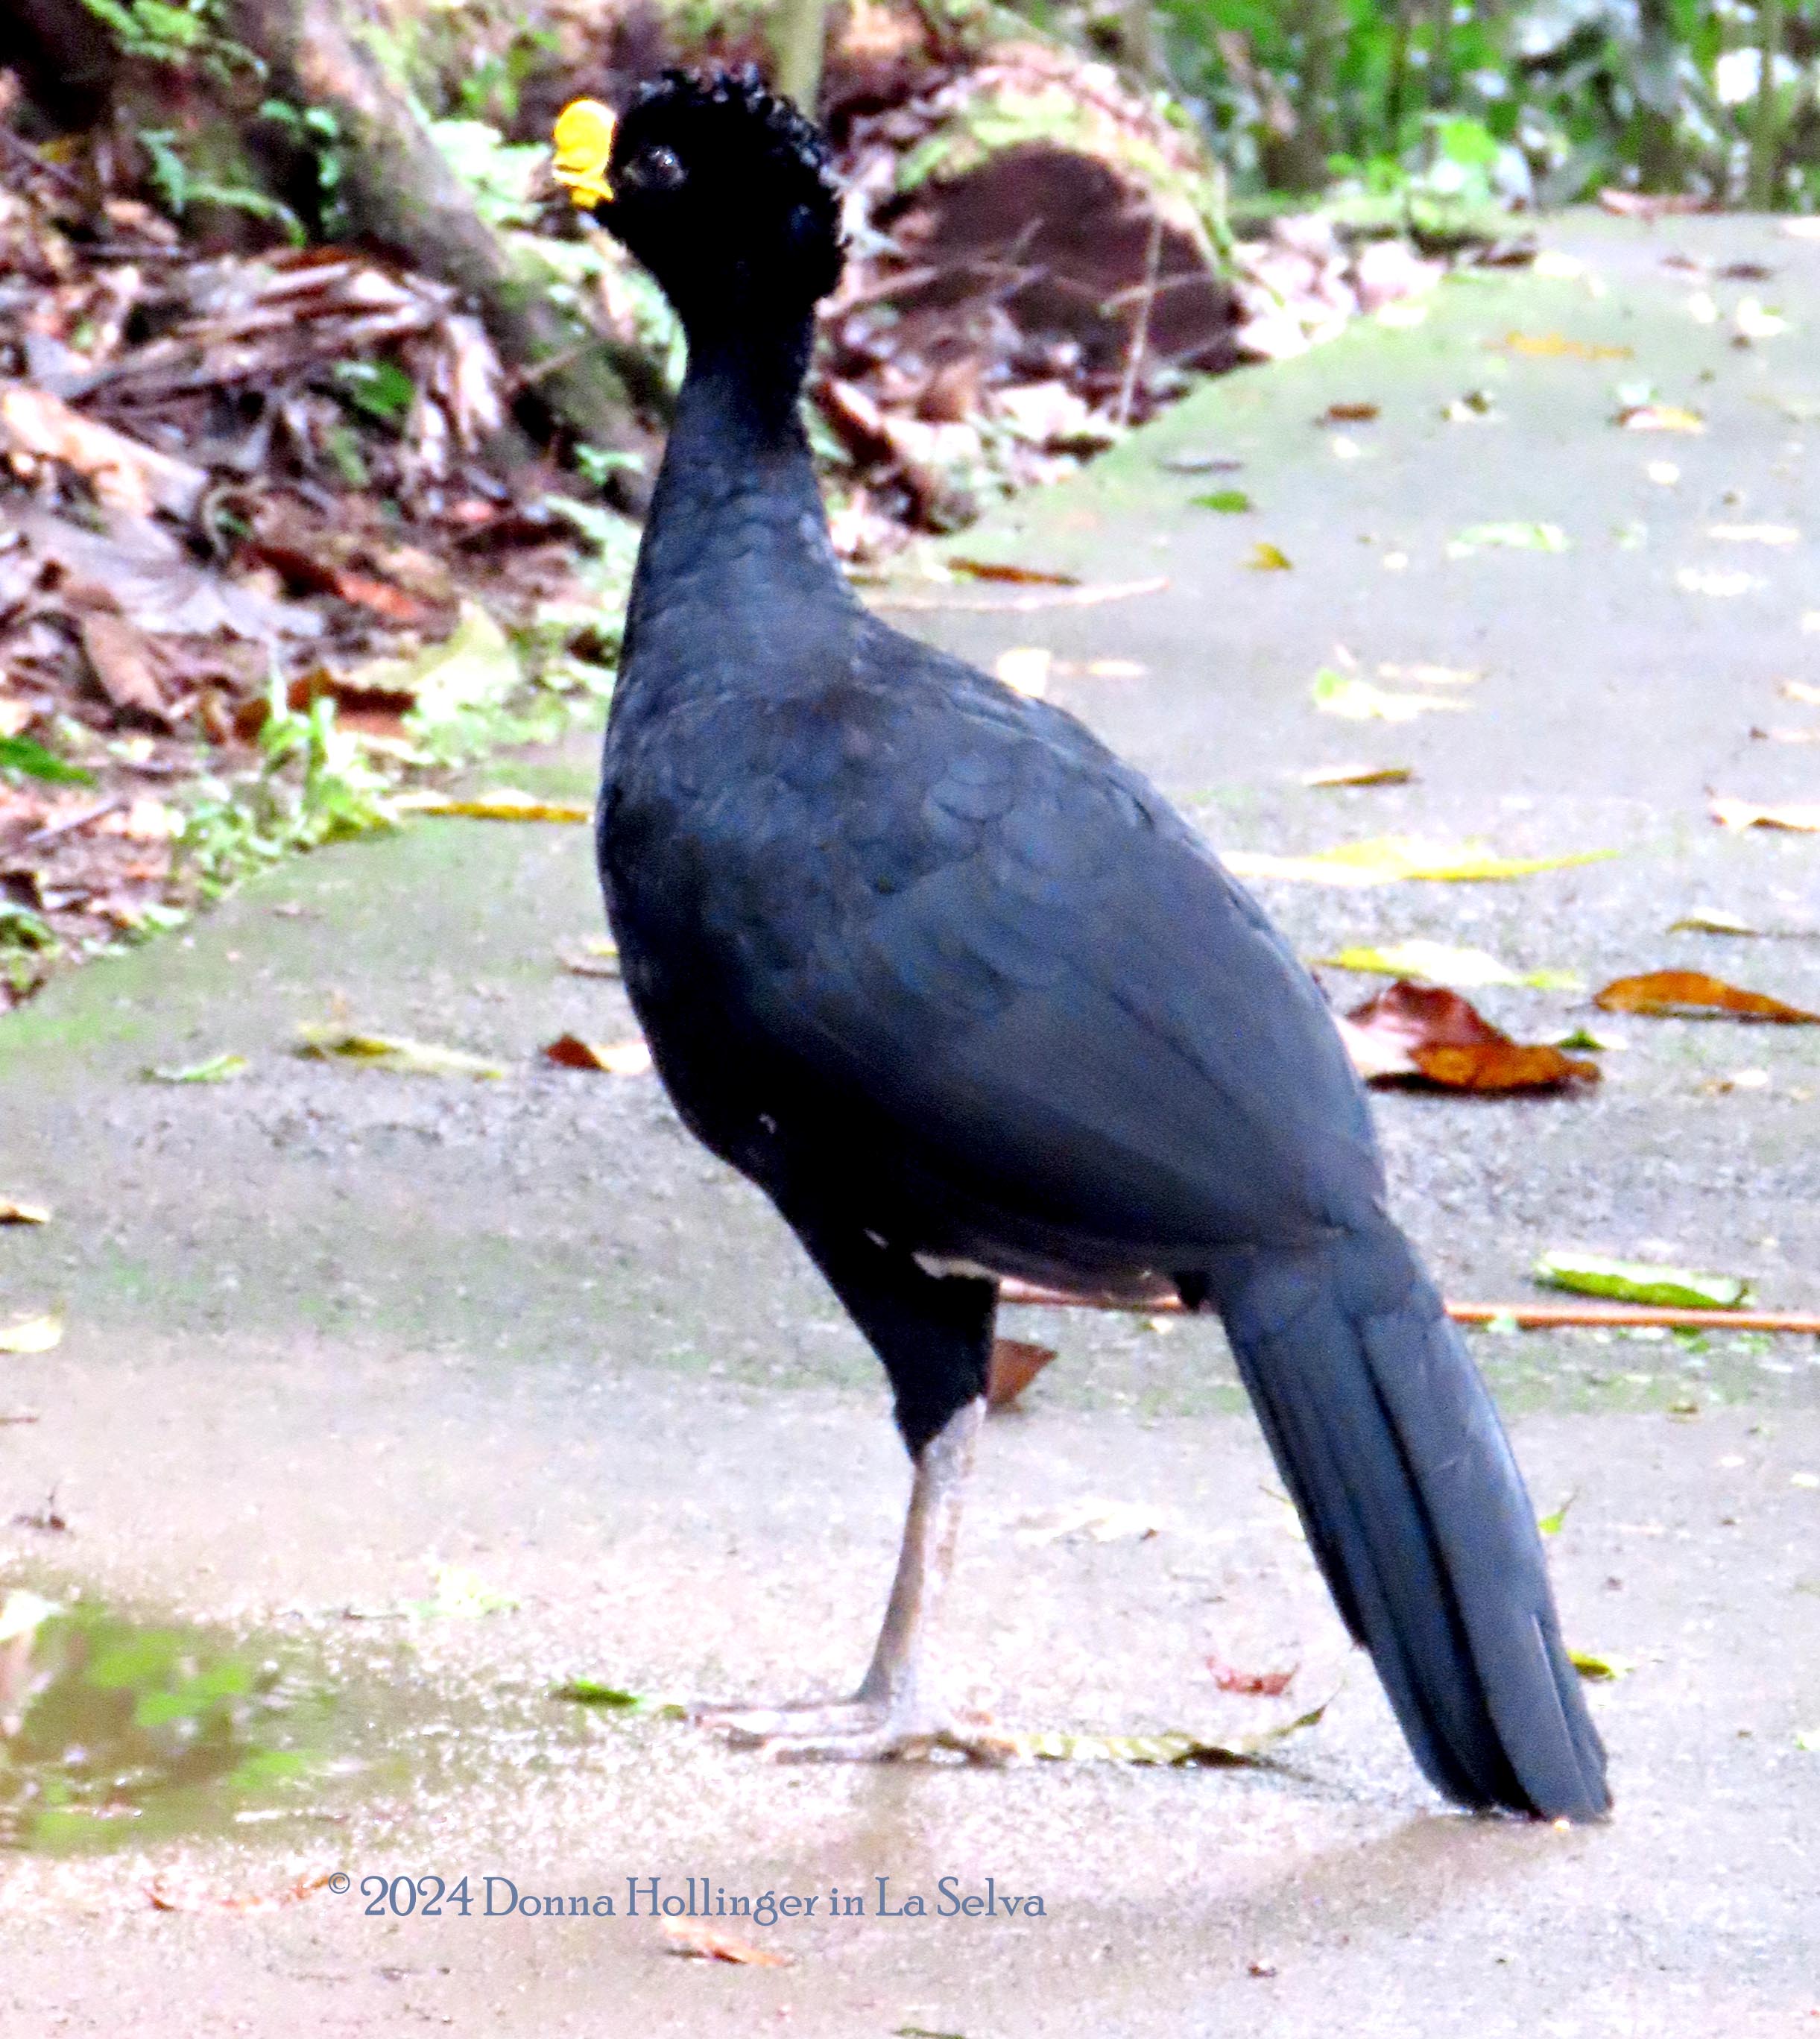 Great Curassow stopping for a sip at a Rain Puddle